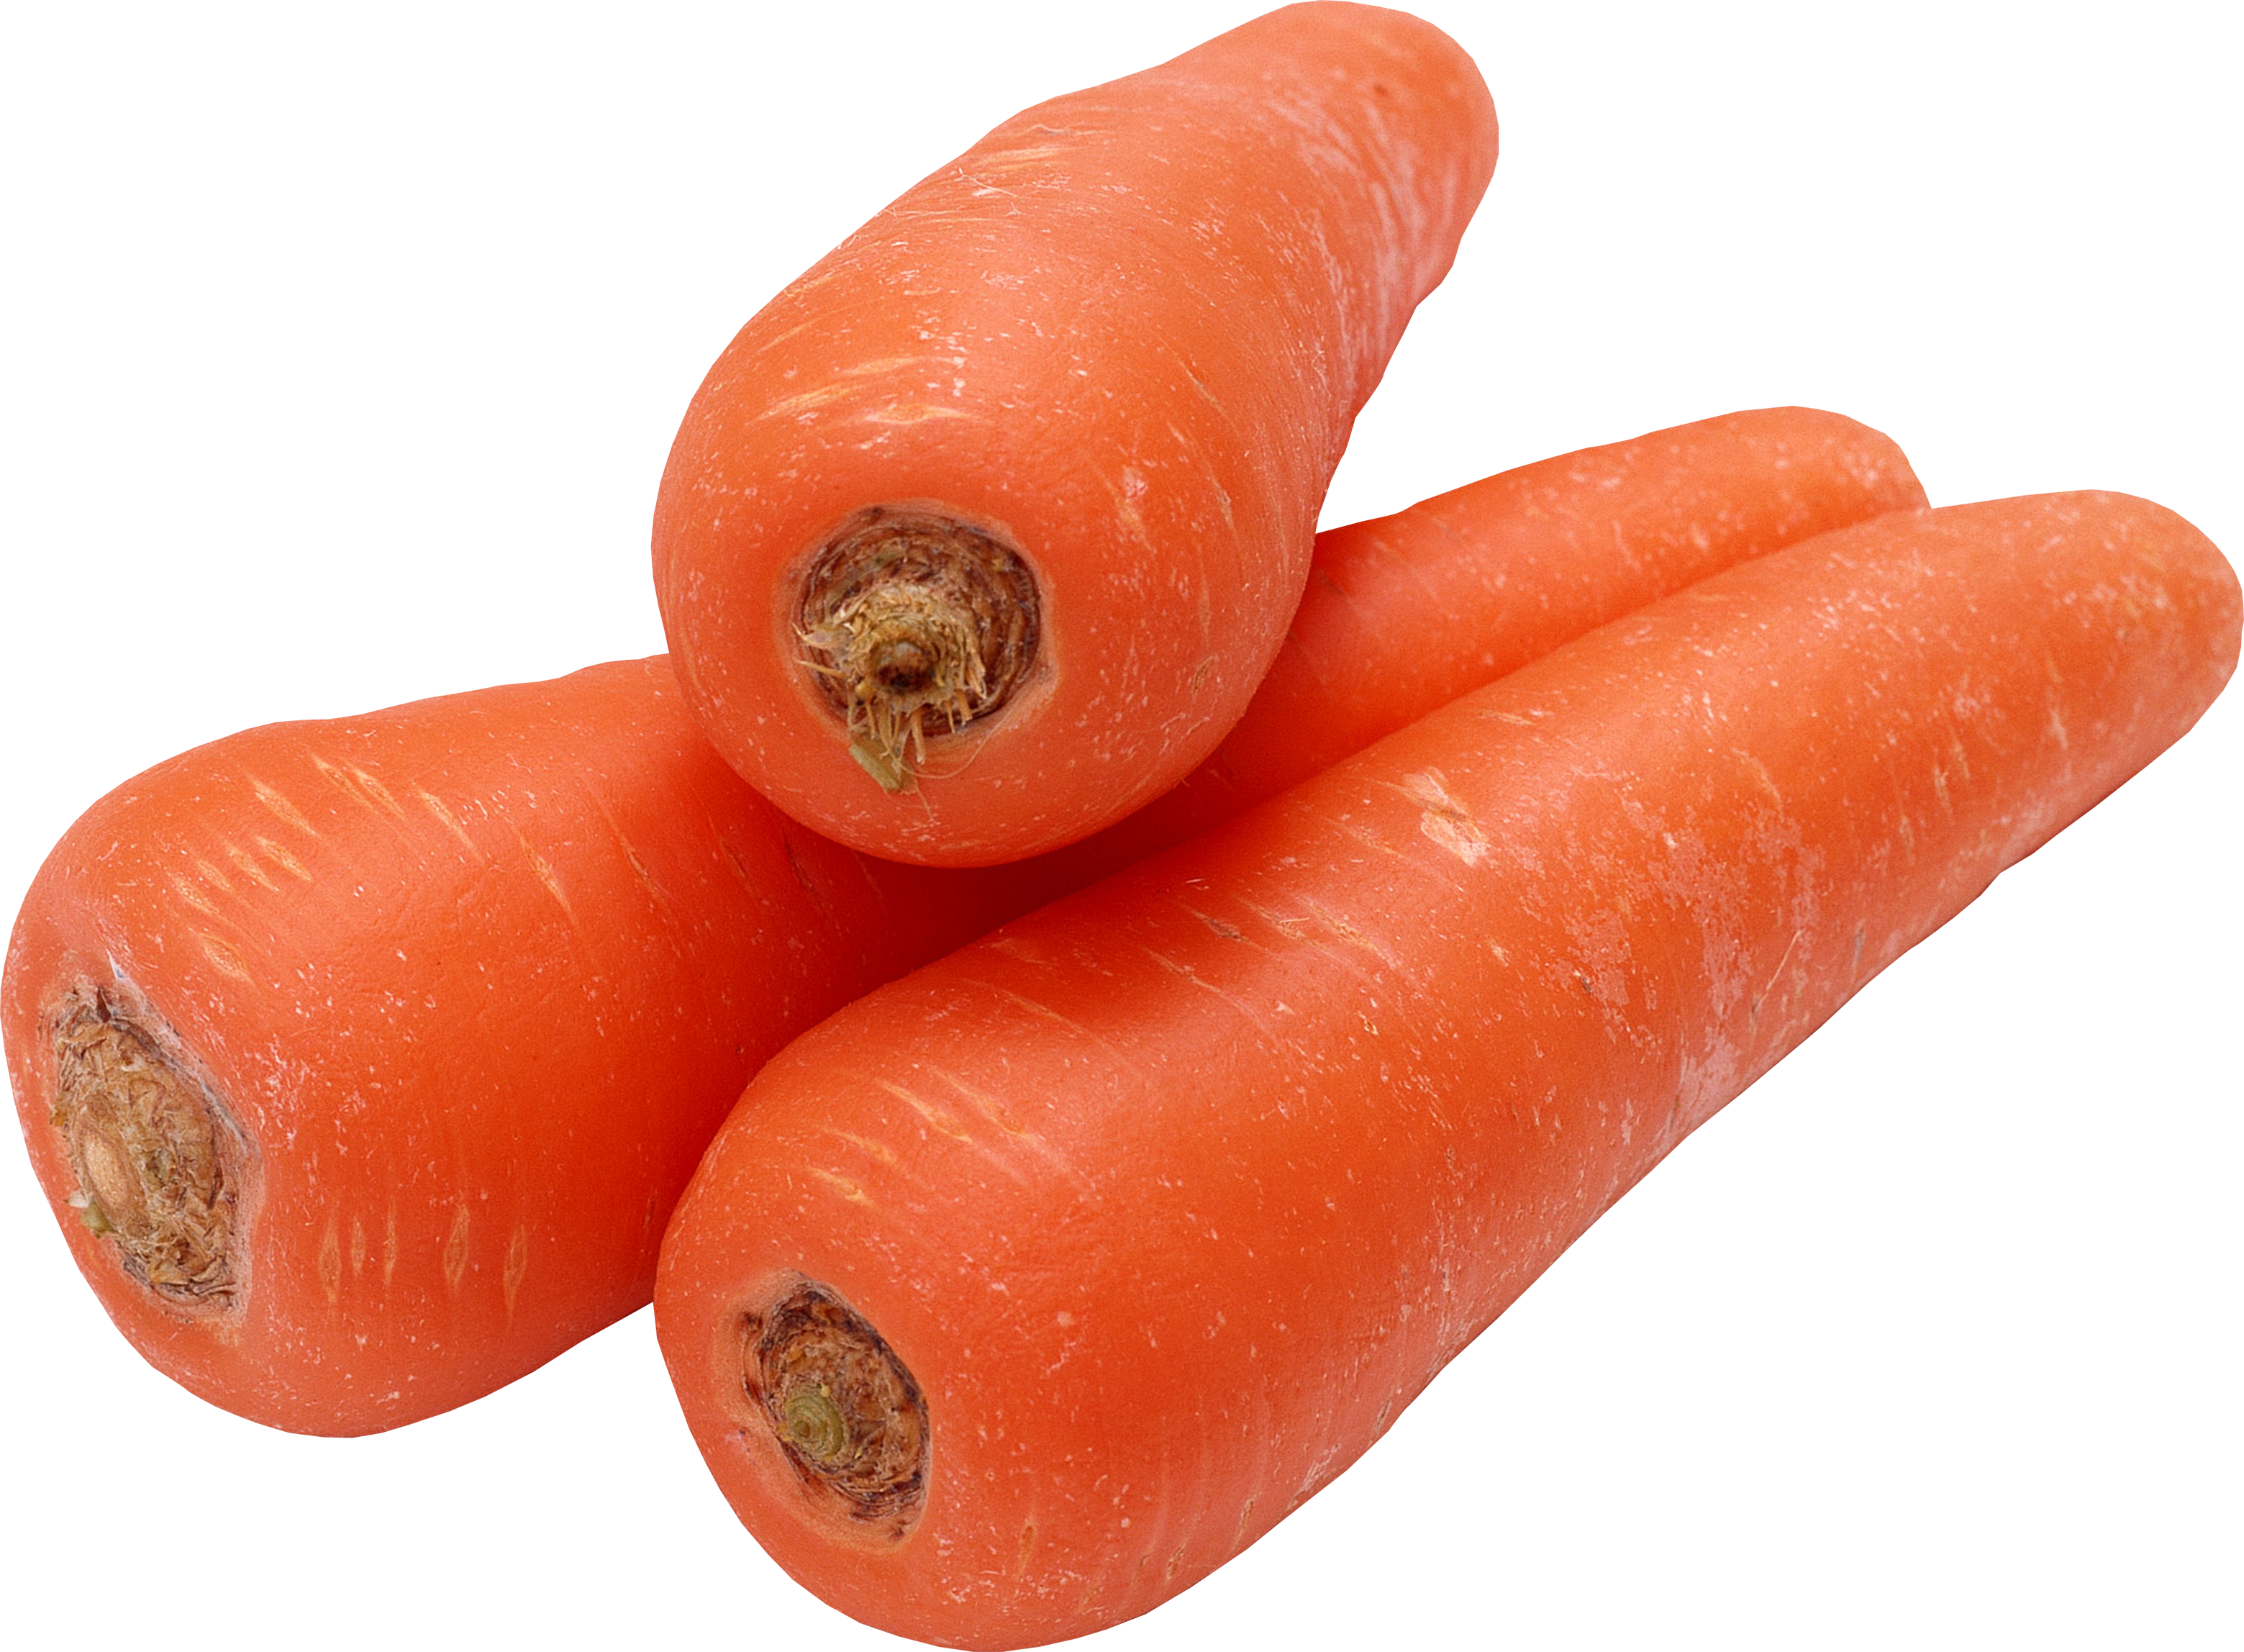 Carrot PNG - 23431